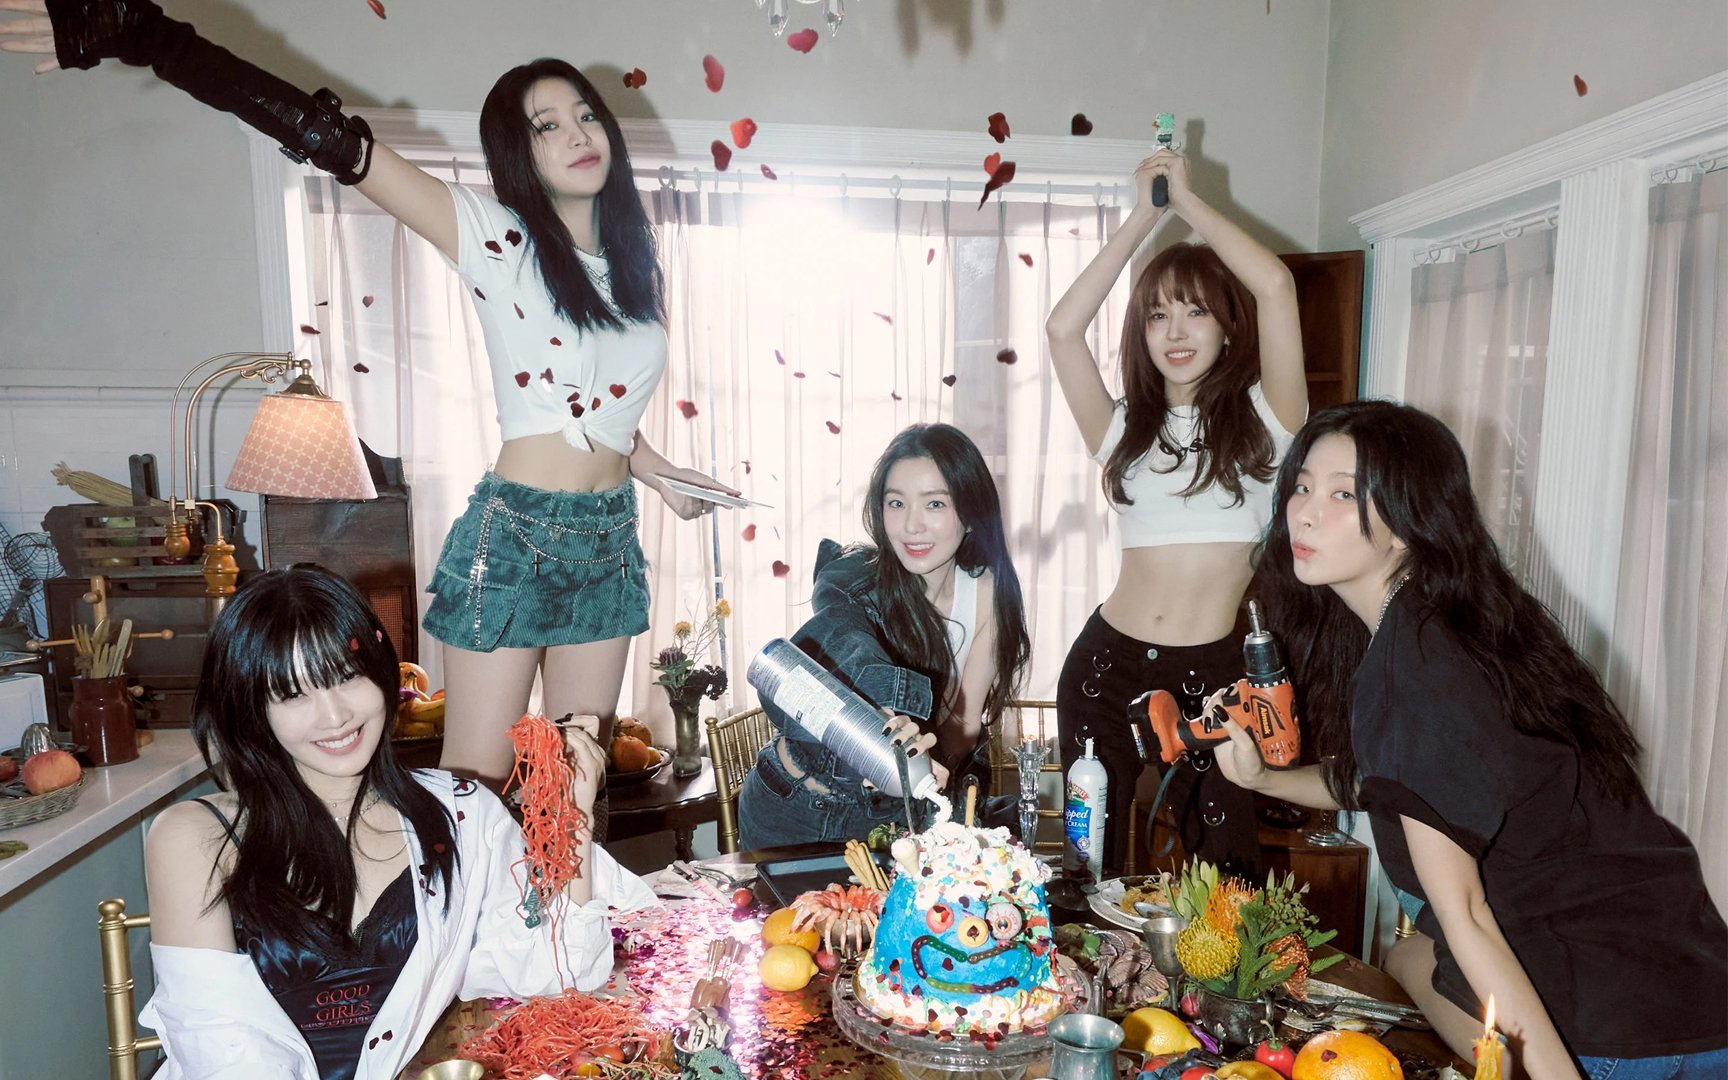 Red Velvet gets together to throw a crazy birthday party in the new